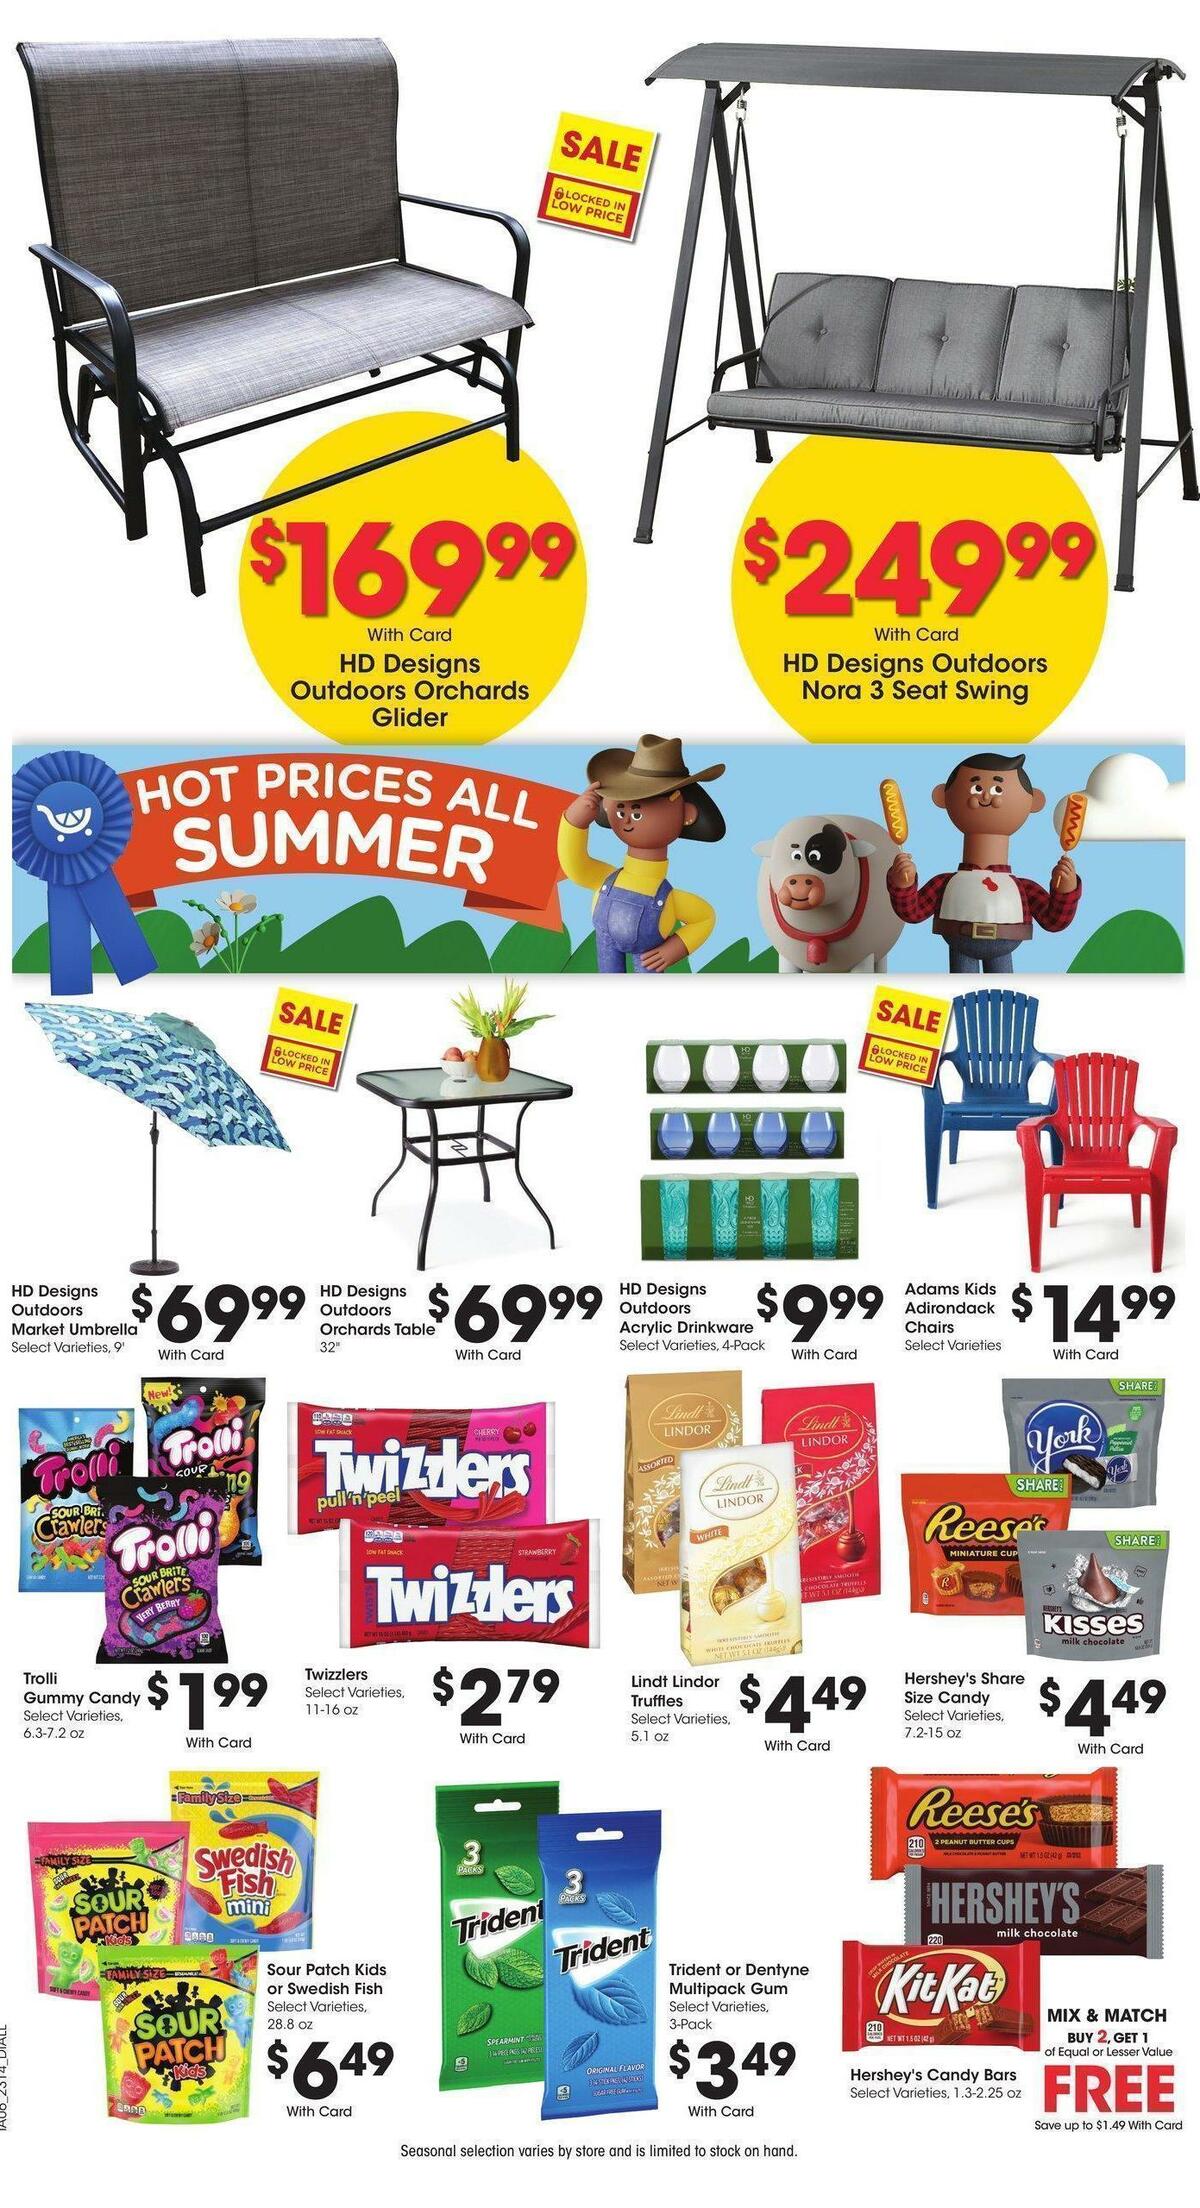 Dillons Weekly Ad from May 3